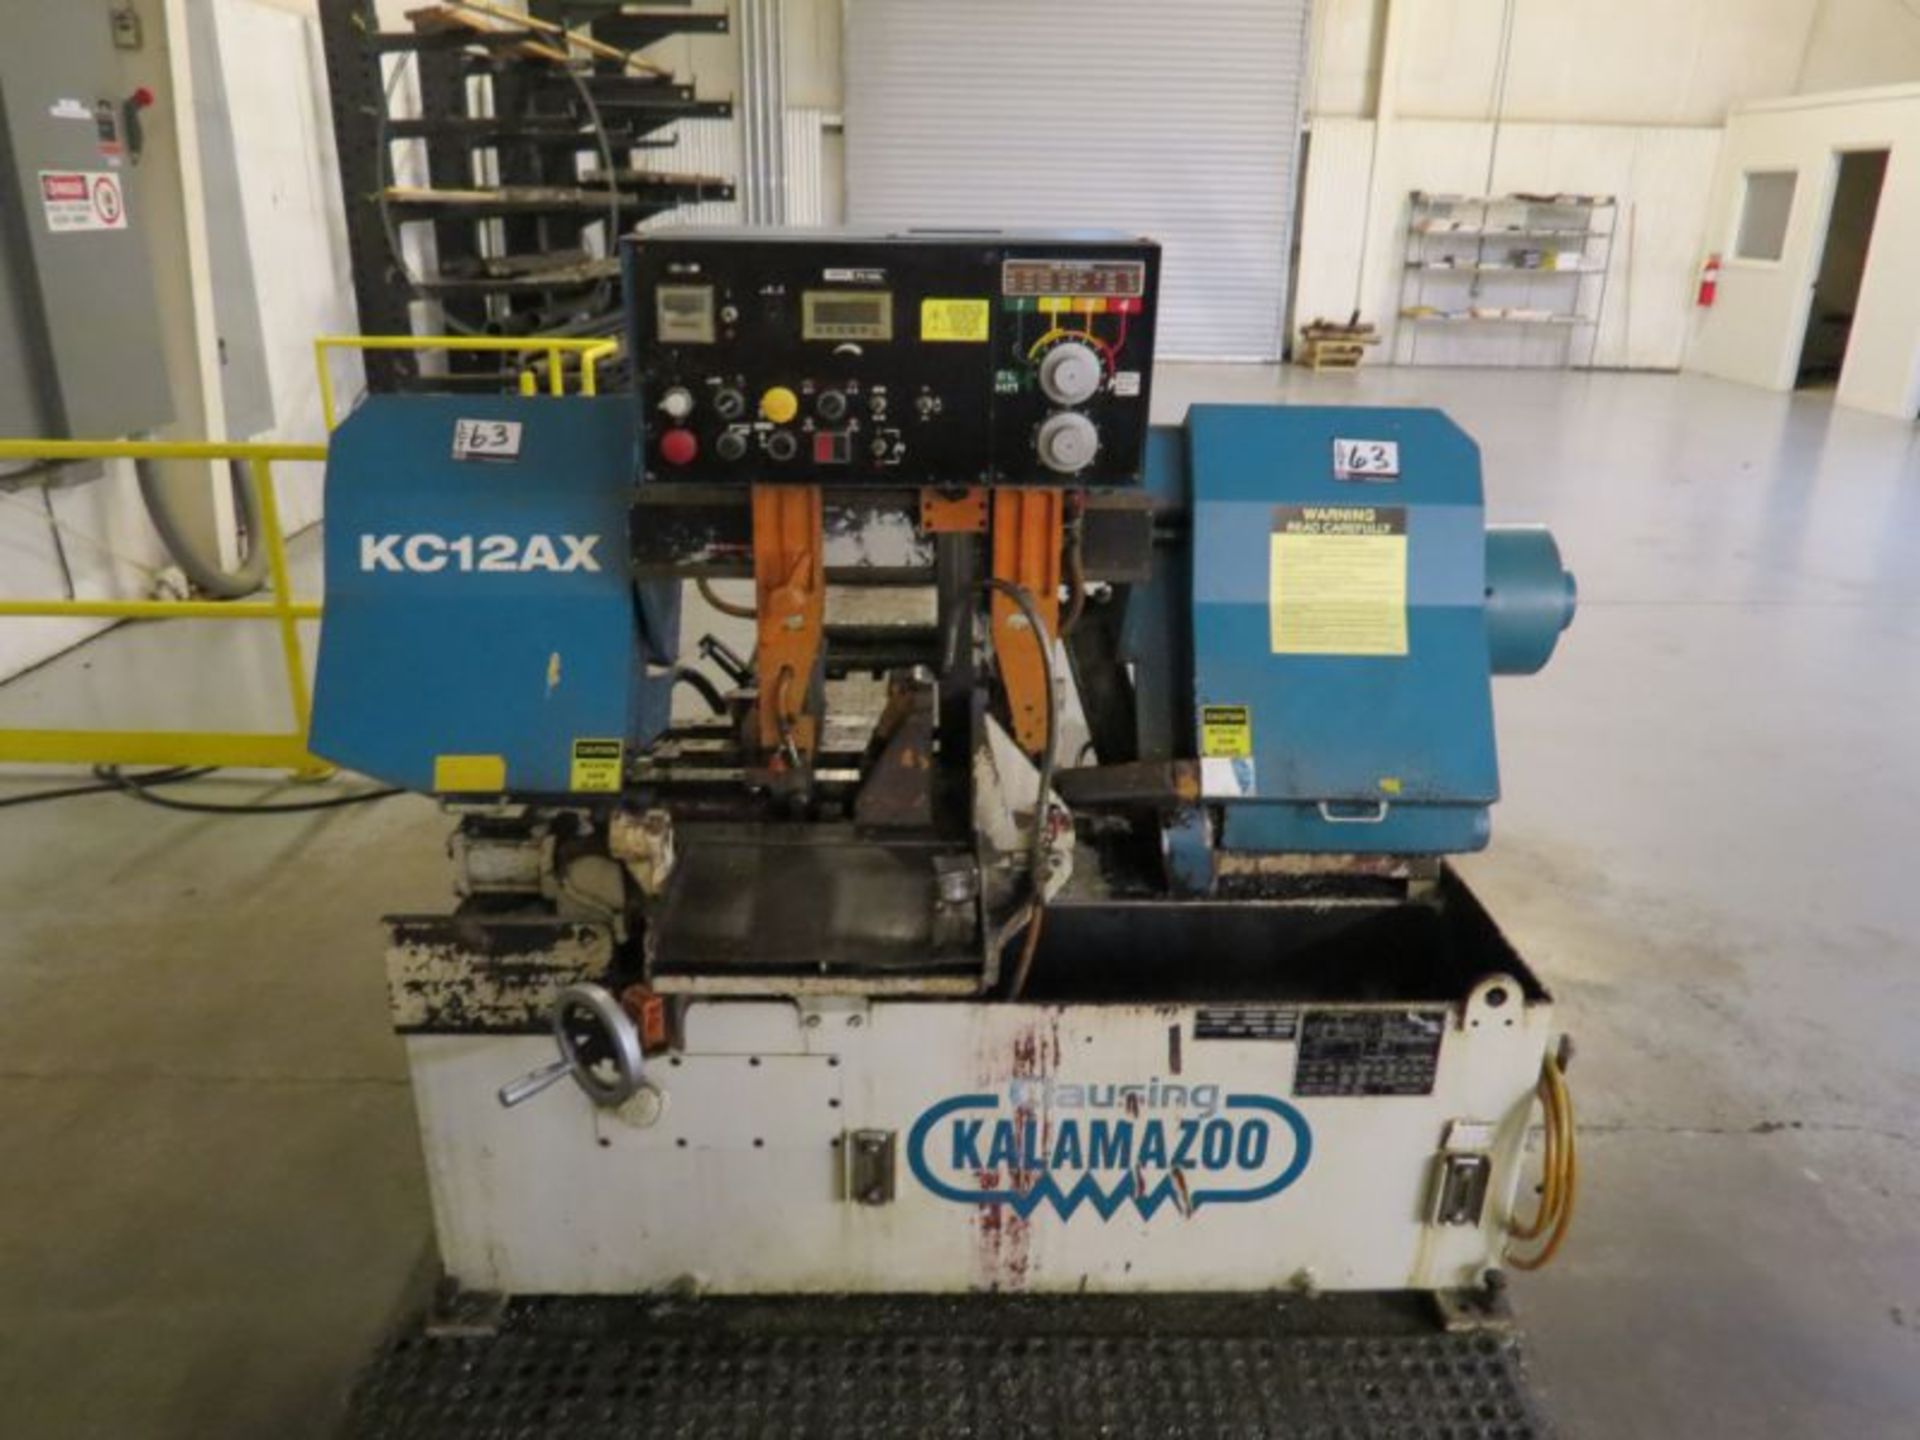 Clausing Kalamzoo KC12AX, 12" Automatic Horizontal Band Saw, with Infeed Roller Table, 5 HP, s/n